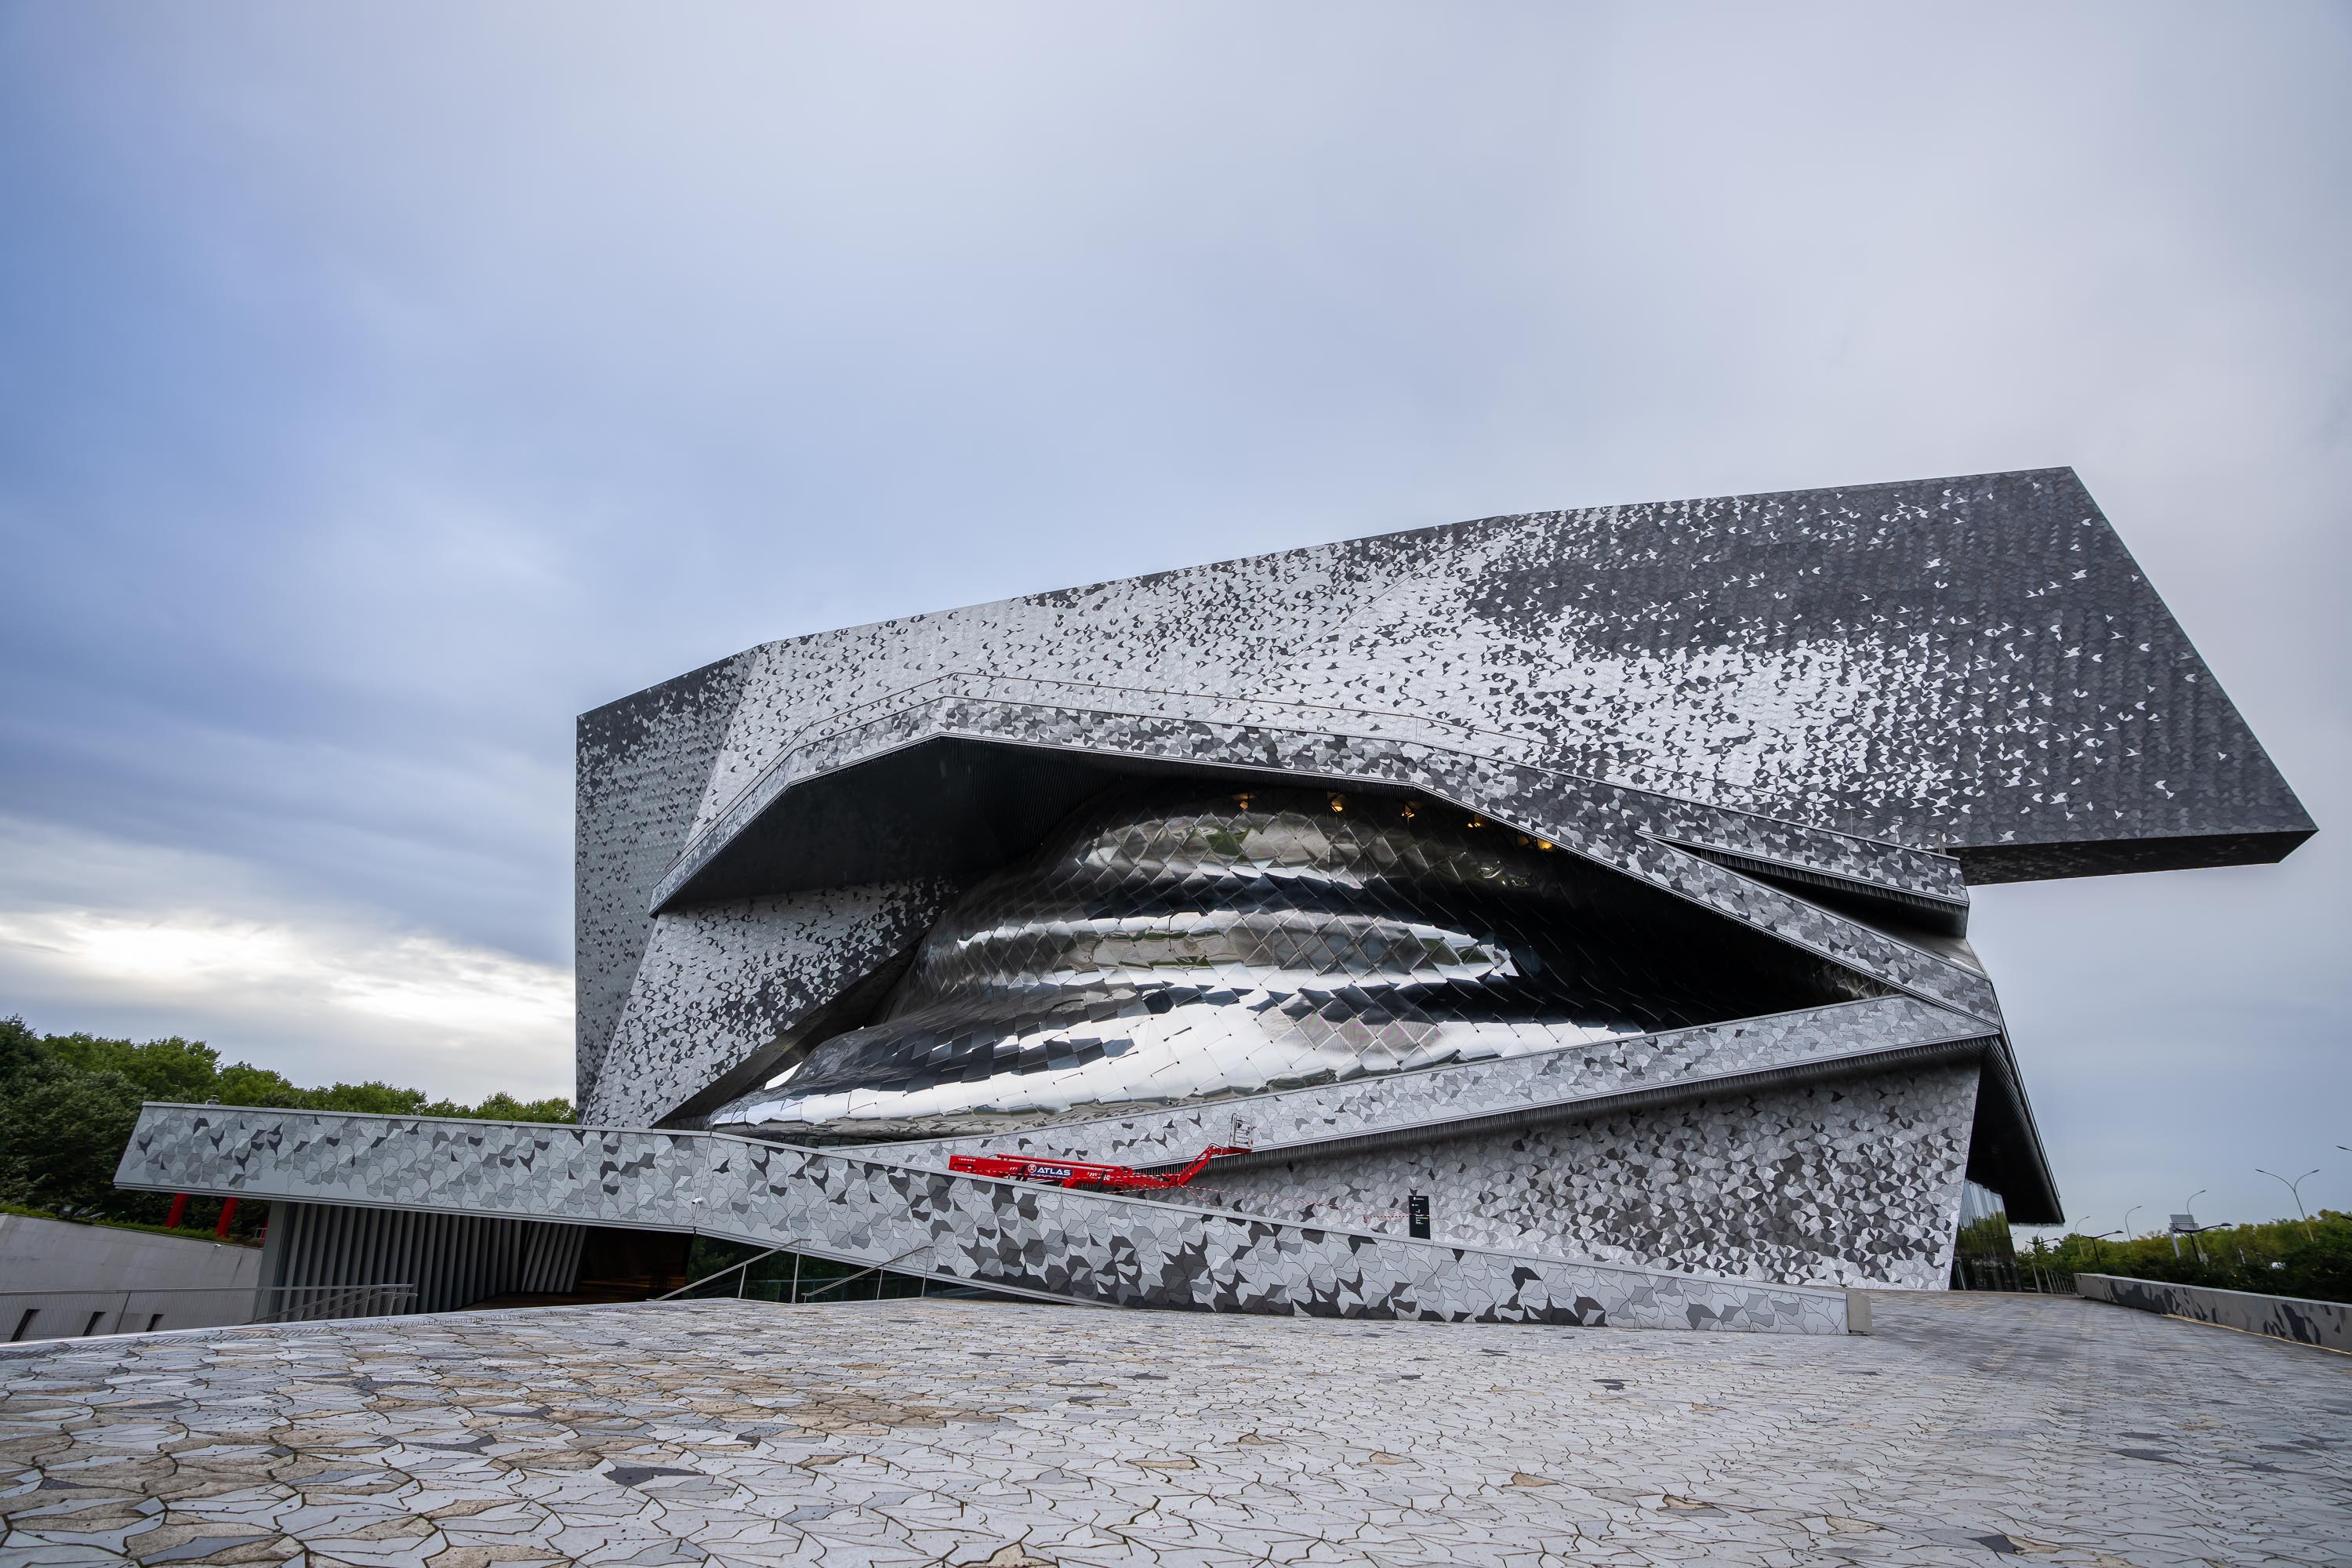 Even though the Philharmonie de Paris, designed by Jean Nouvel, only opened in 2015, it’s become one of Paris’s most iconic buildings